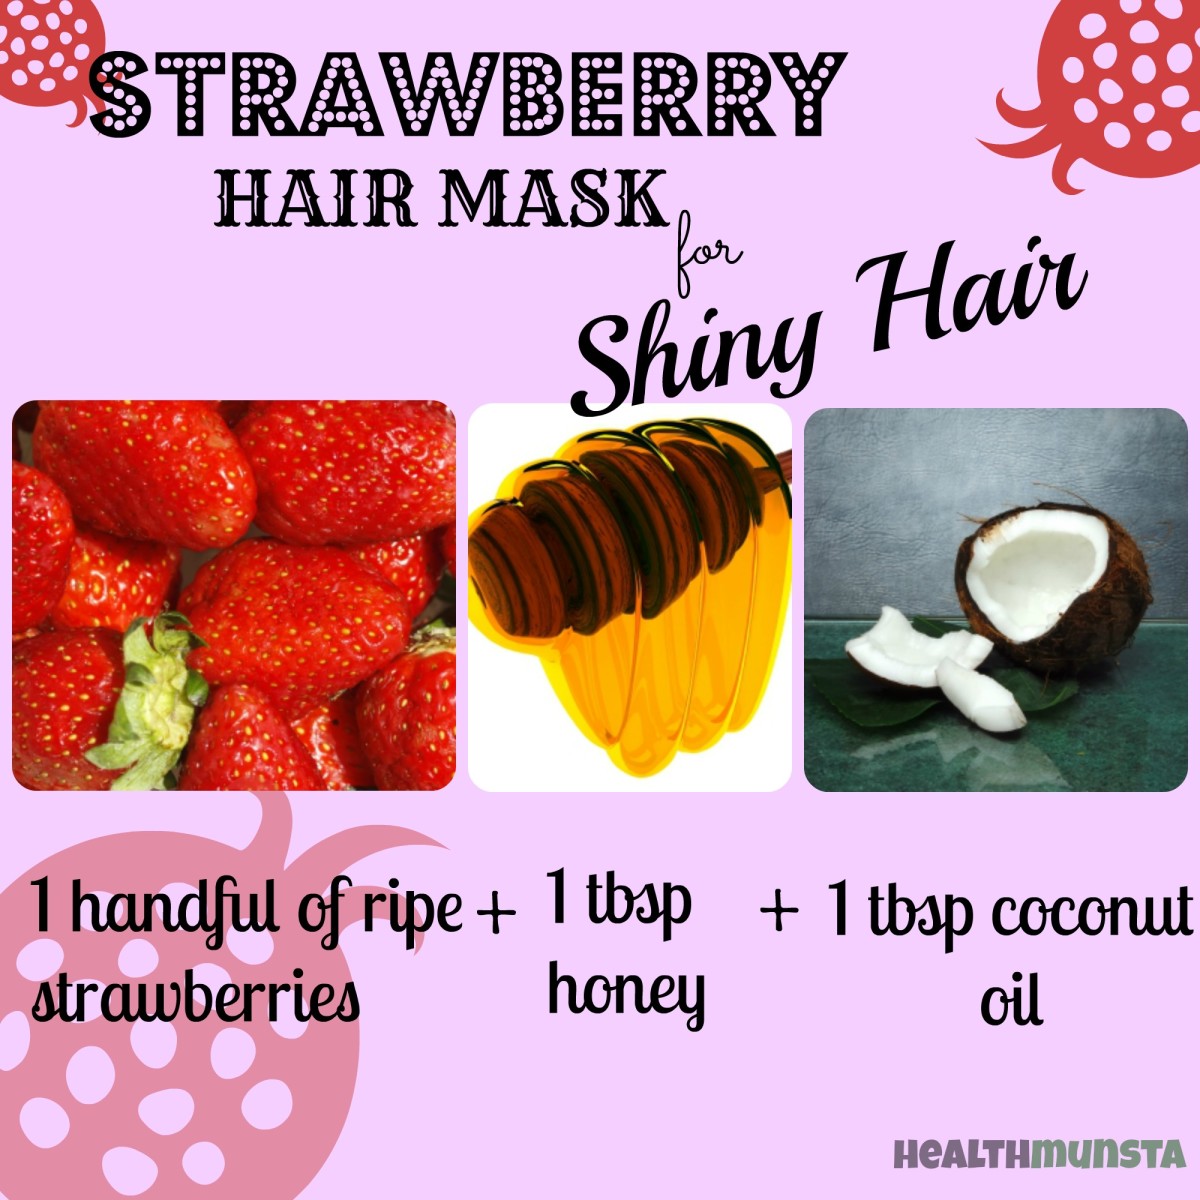 This strawberry hair mask smells delicious and works wonder on oily hair.